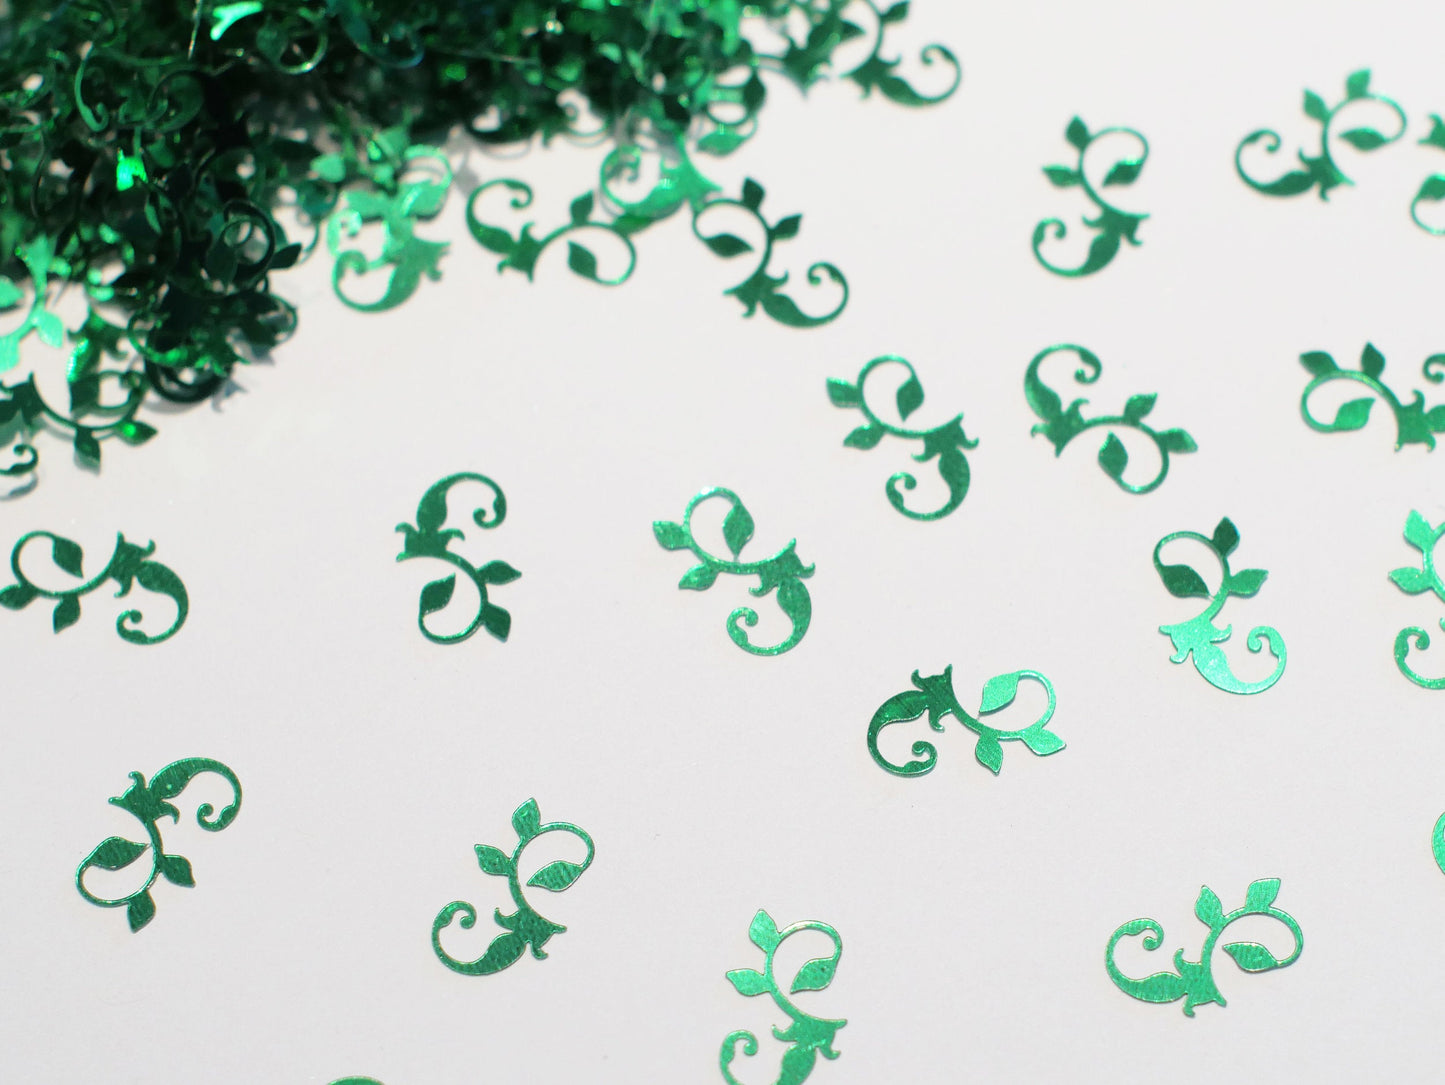 Load image into Gallery viewer, Metallic Green Vines Sequins, 14x9mm
